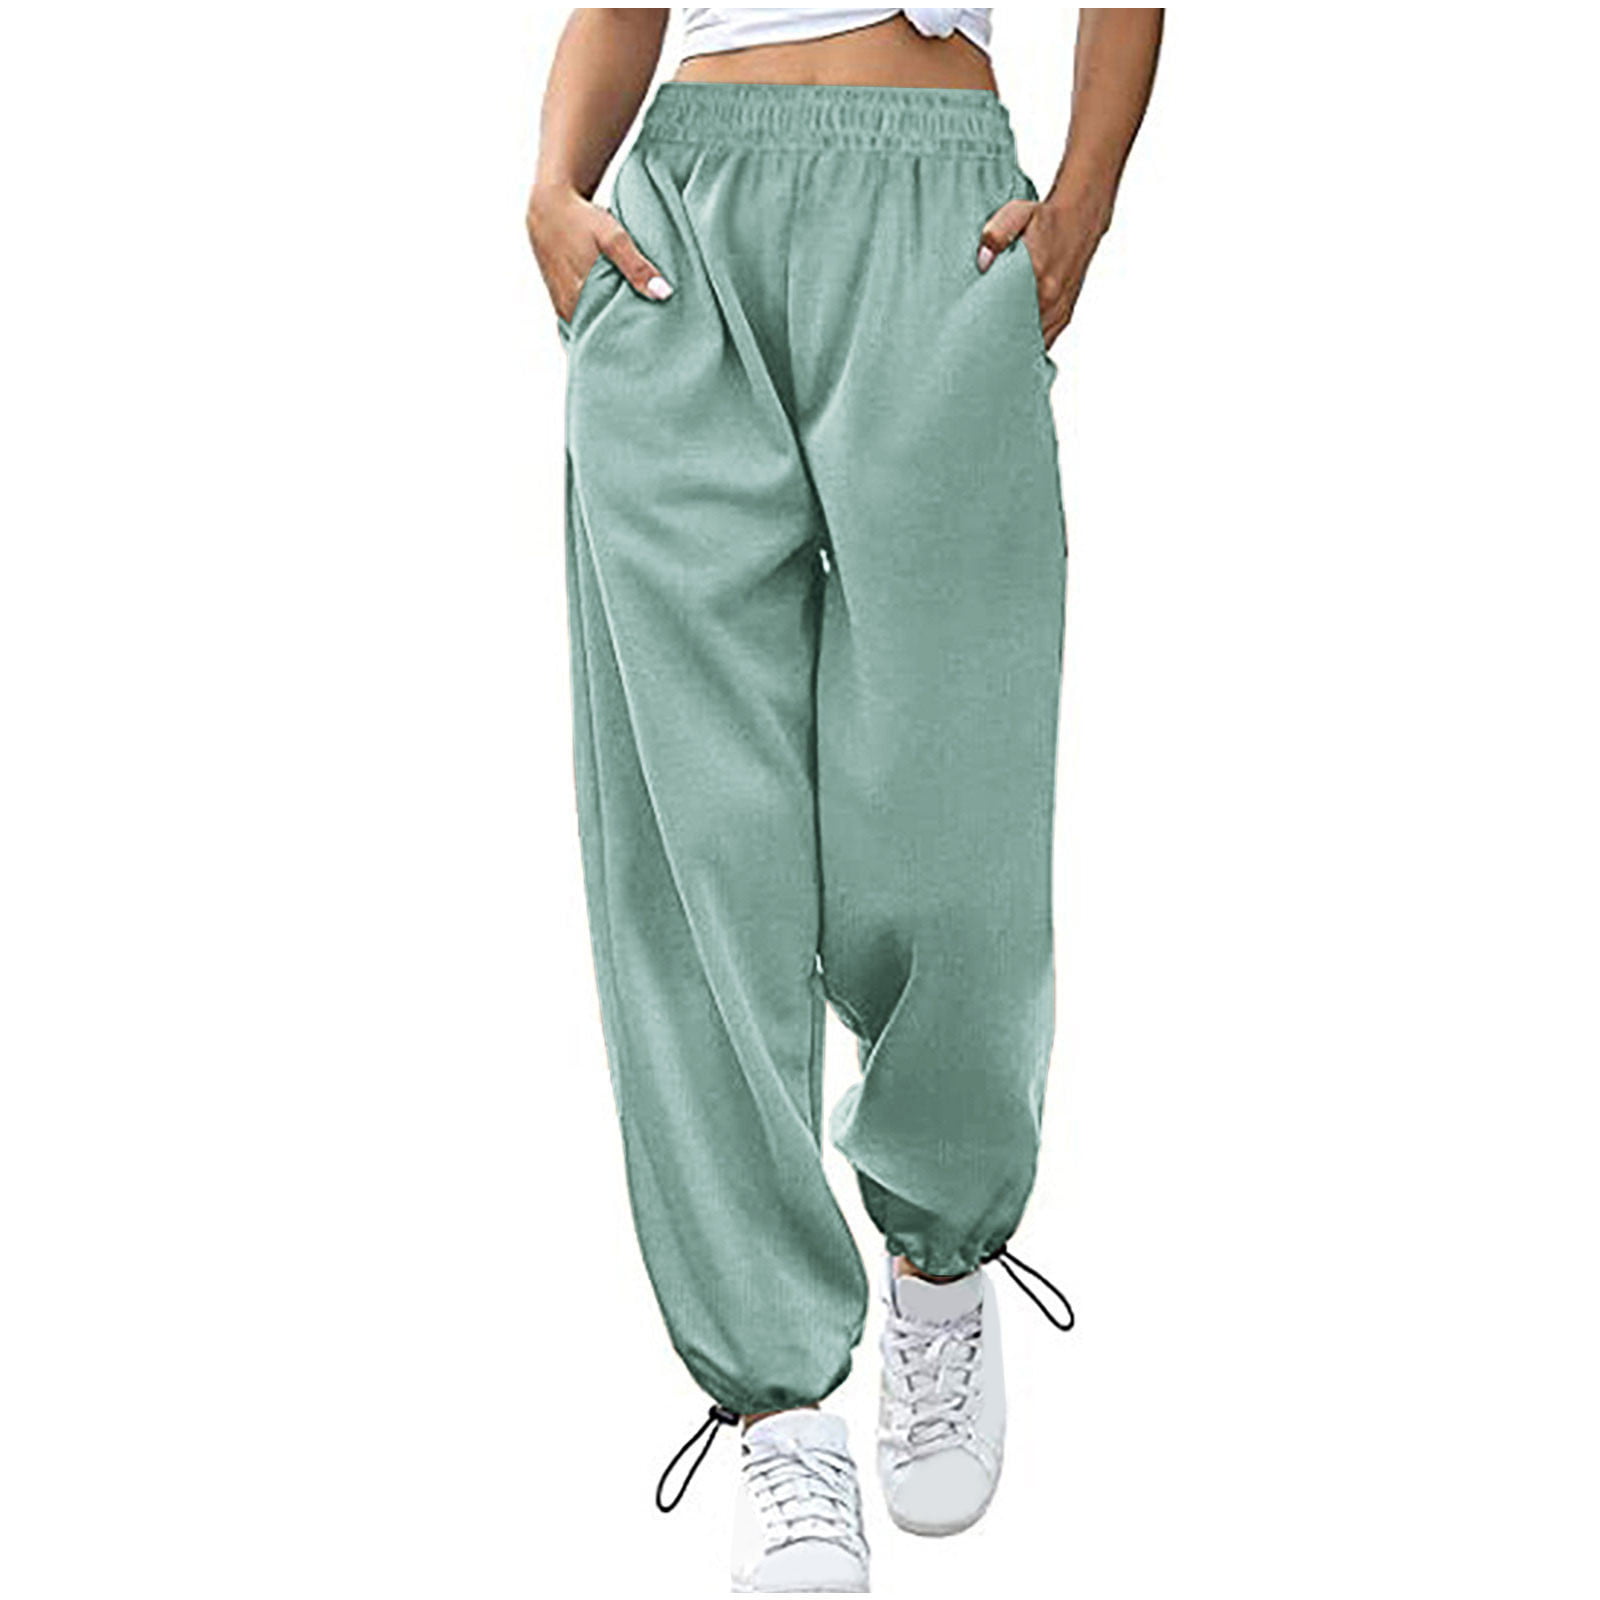  Women's Cinch Bottom Sweatpants Pockets Elastic High Waist  Sporty Gym Athletic Fit Jogger Pants Casual Lounge Trousers Gray :  Clothing, Shoes & Jewelry